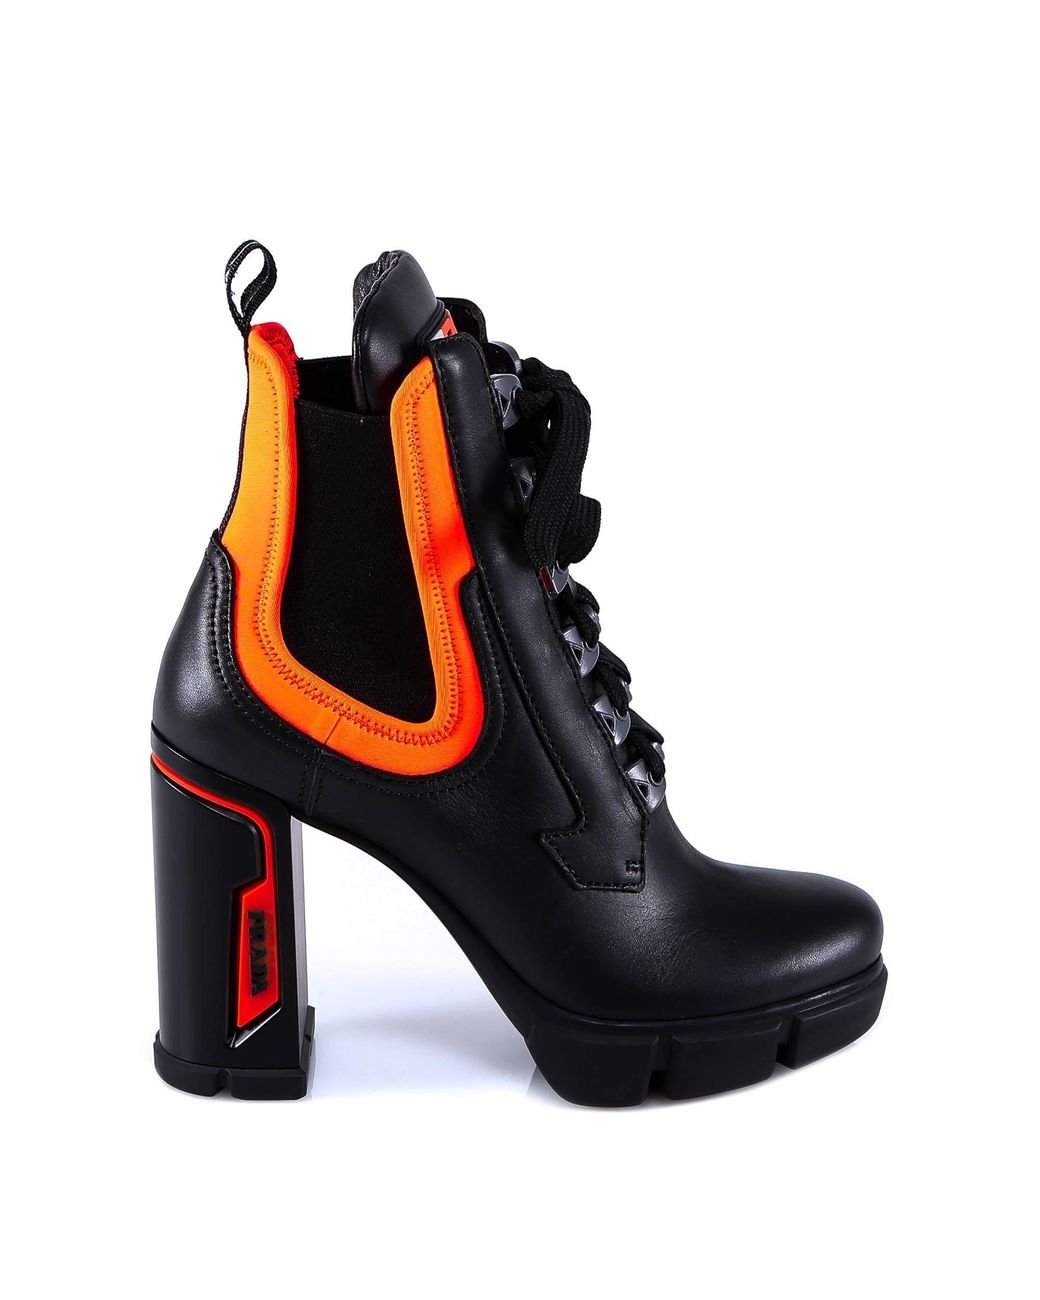 Prada Neon Detail Lace Up Ankle Boots in Black | Lyst